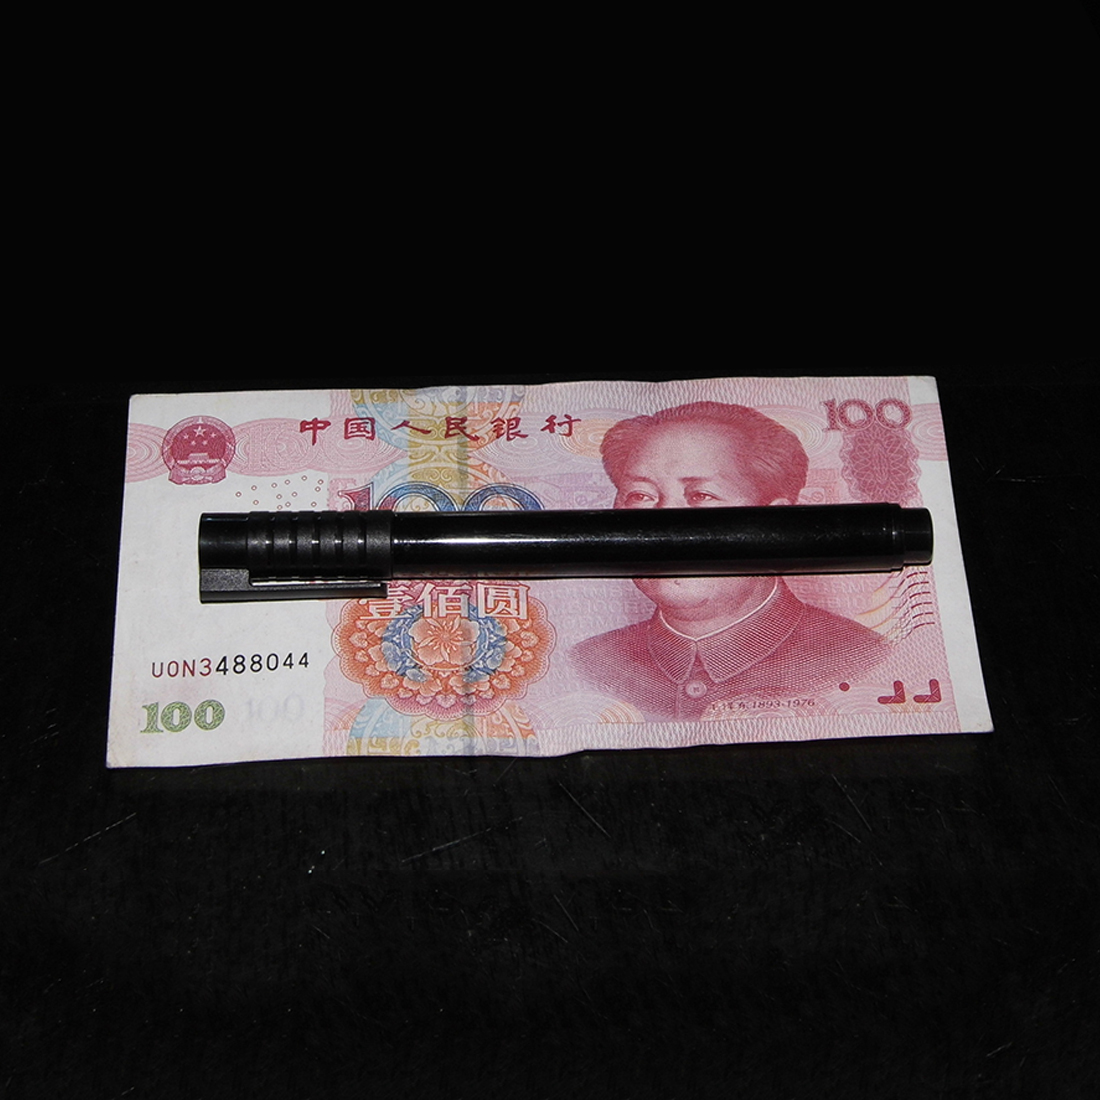 2 x Money Checker Banconote Currency Detector Counterfeit Marker Fake Banknotes Tester Pen Ink Hand Checking Tools